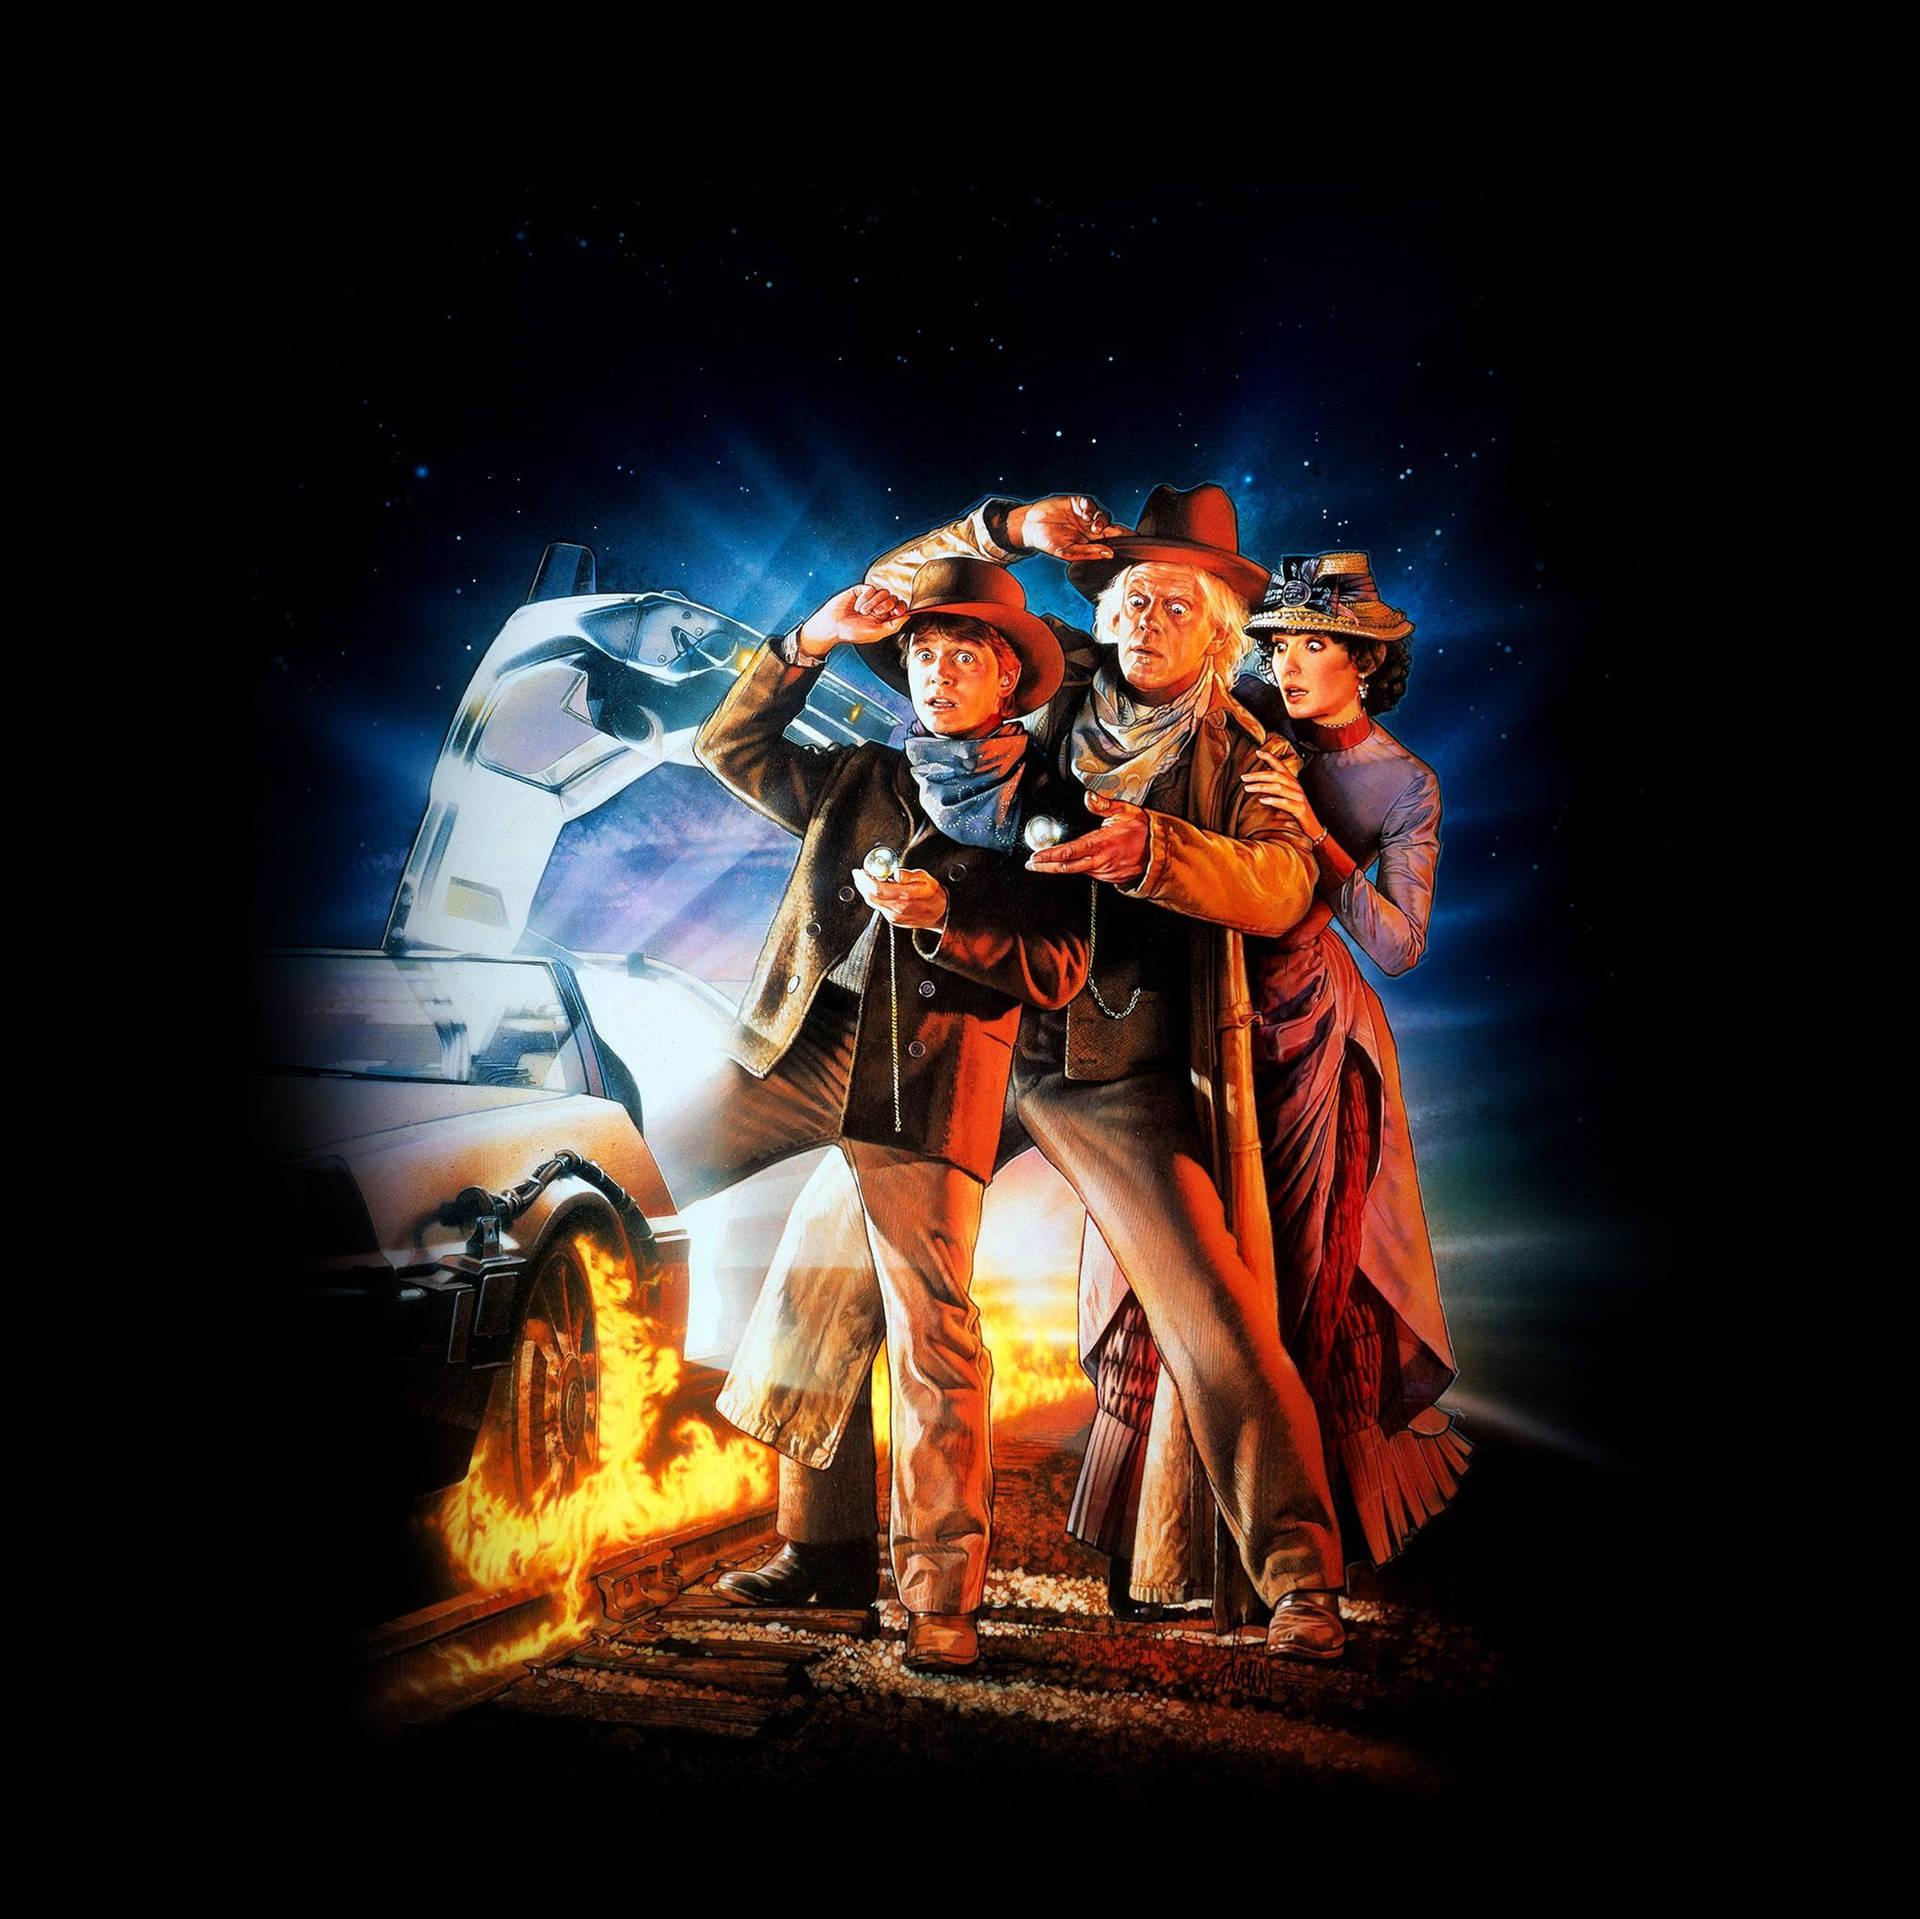 Back To The Future Wallpapers